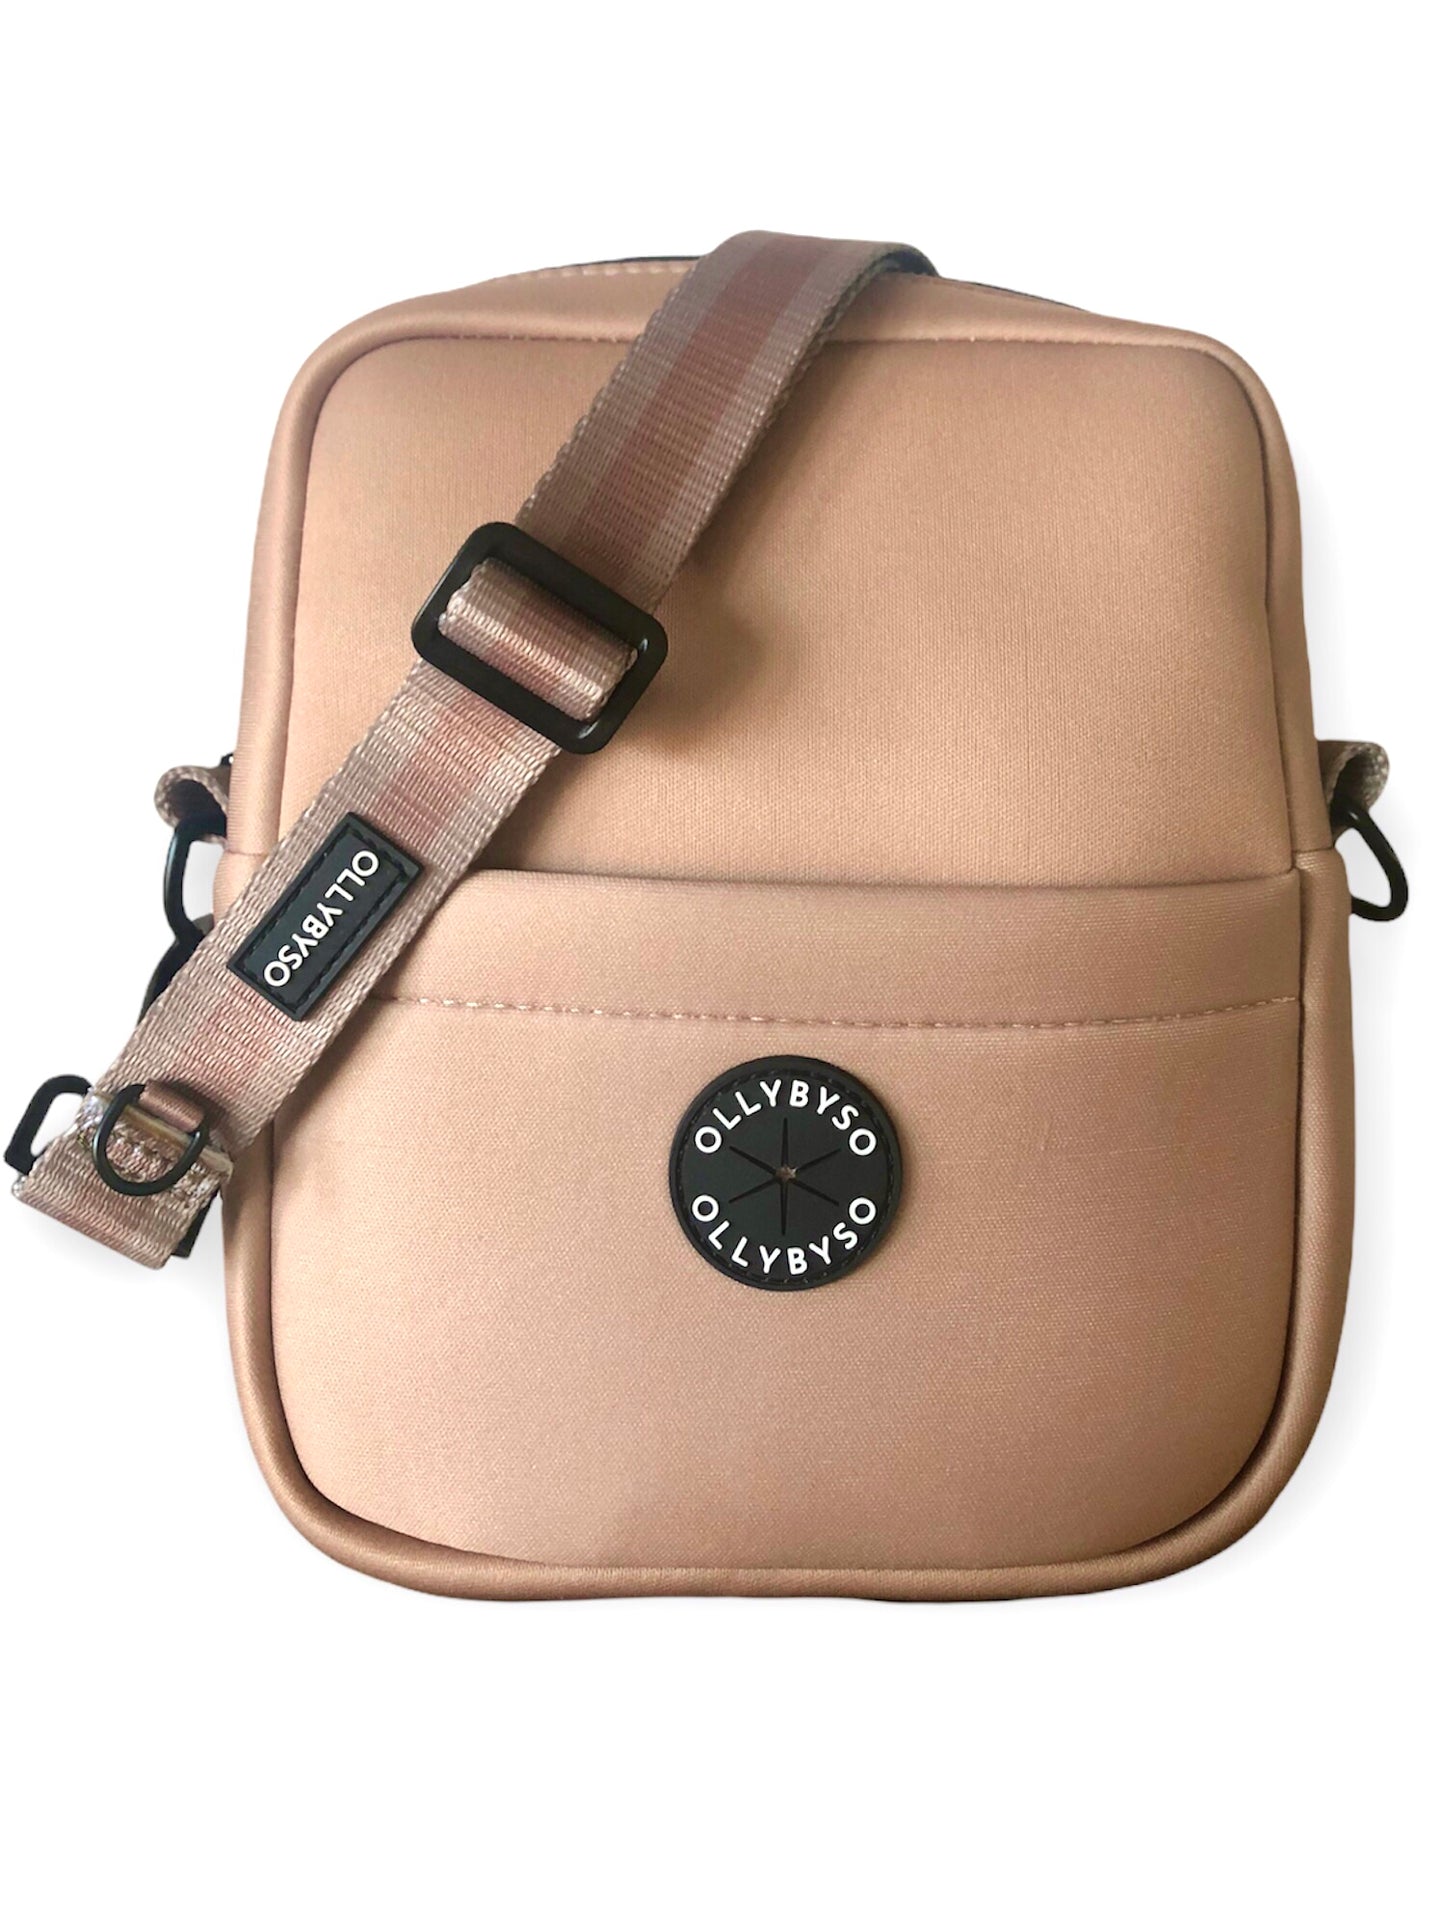 Out With The Dog Crossbody Bag - Camel Khaki